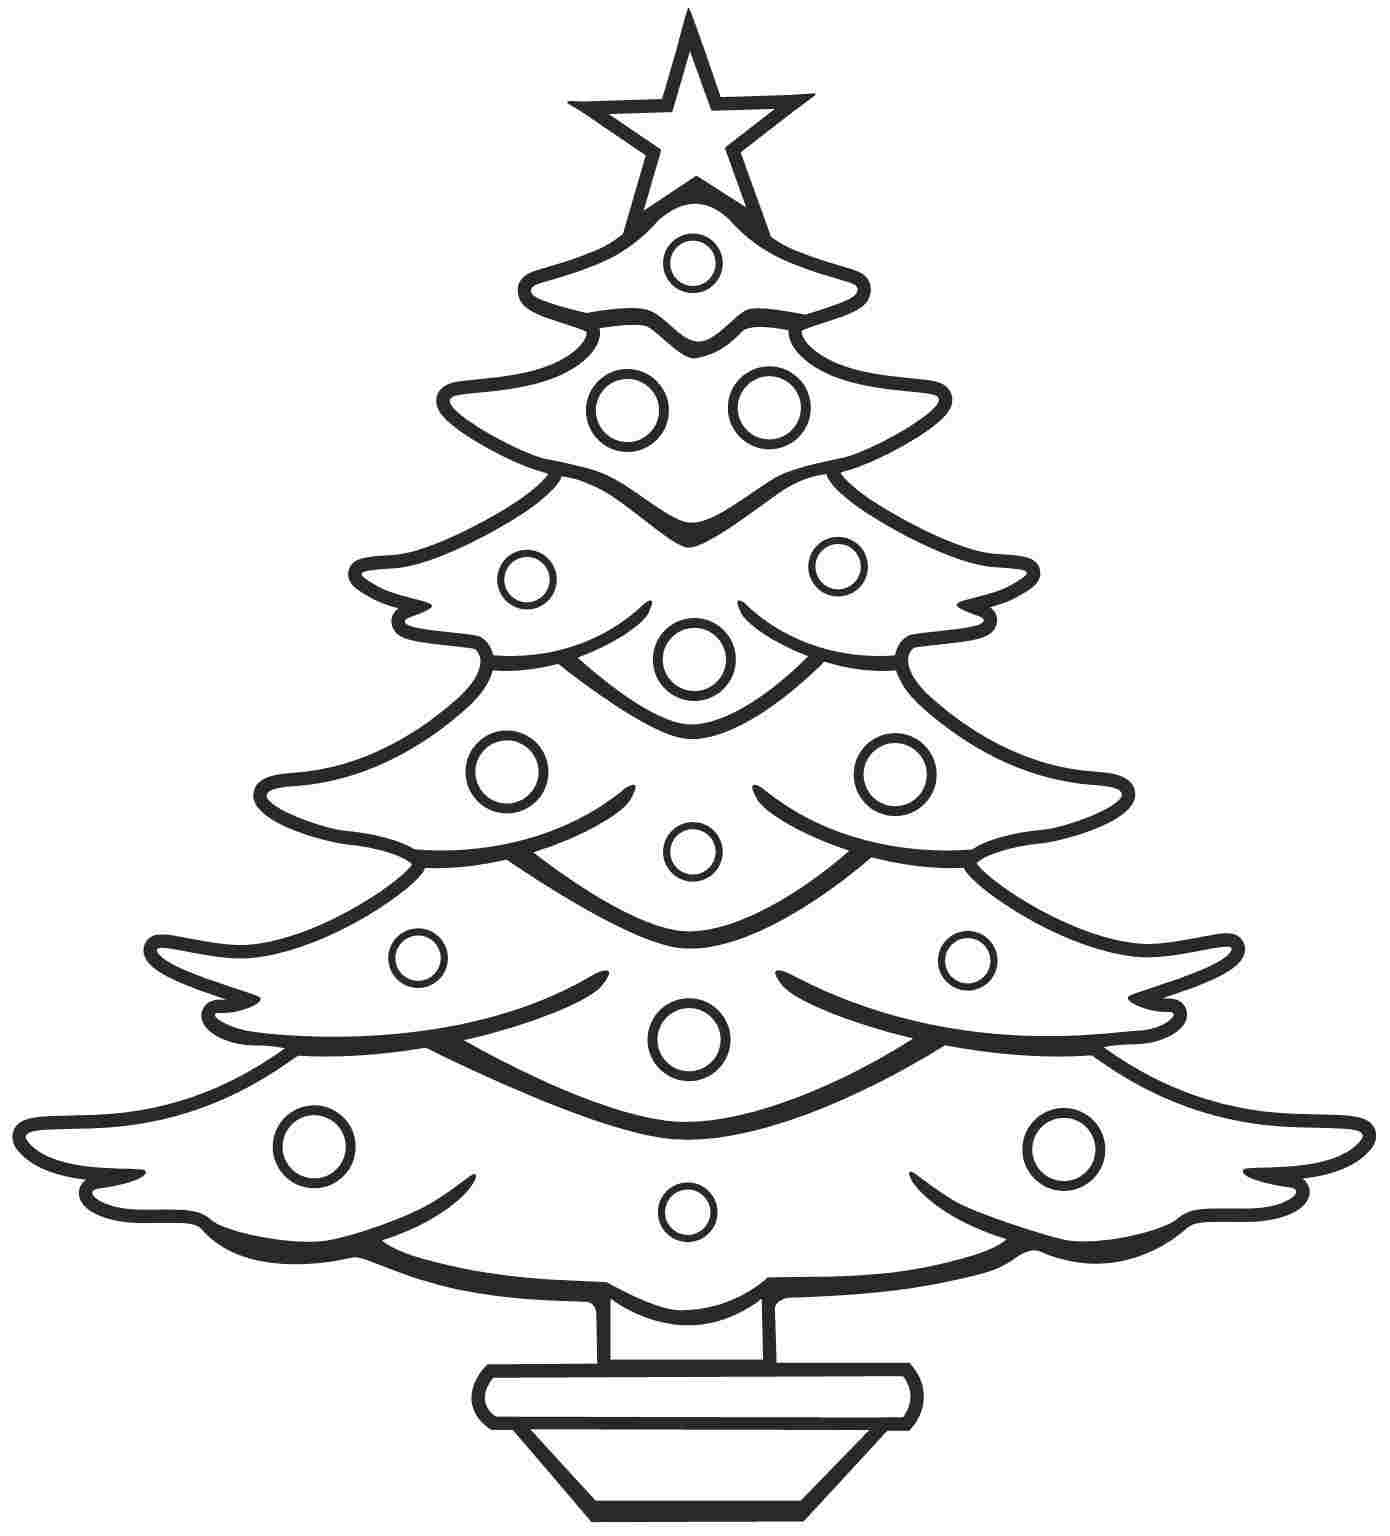 Easy Christmas tree drawing  completed pencil outline  Lets Draw That  Christmas  tree drawing Christmas tree drawing easy Simple christmas tree